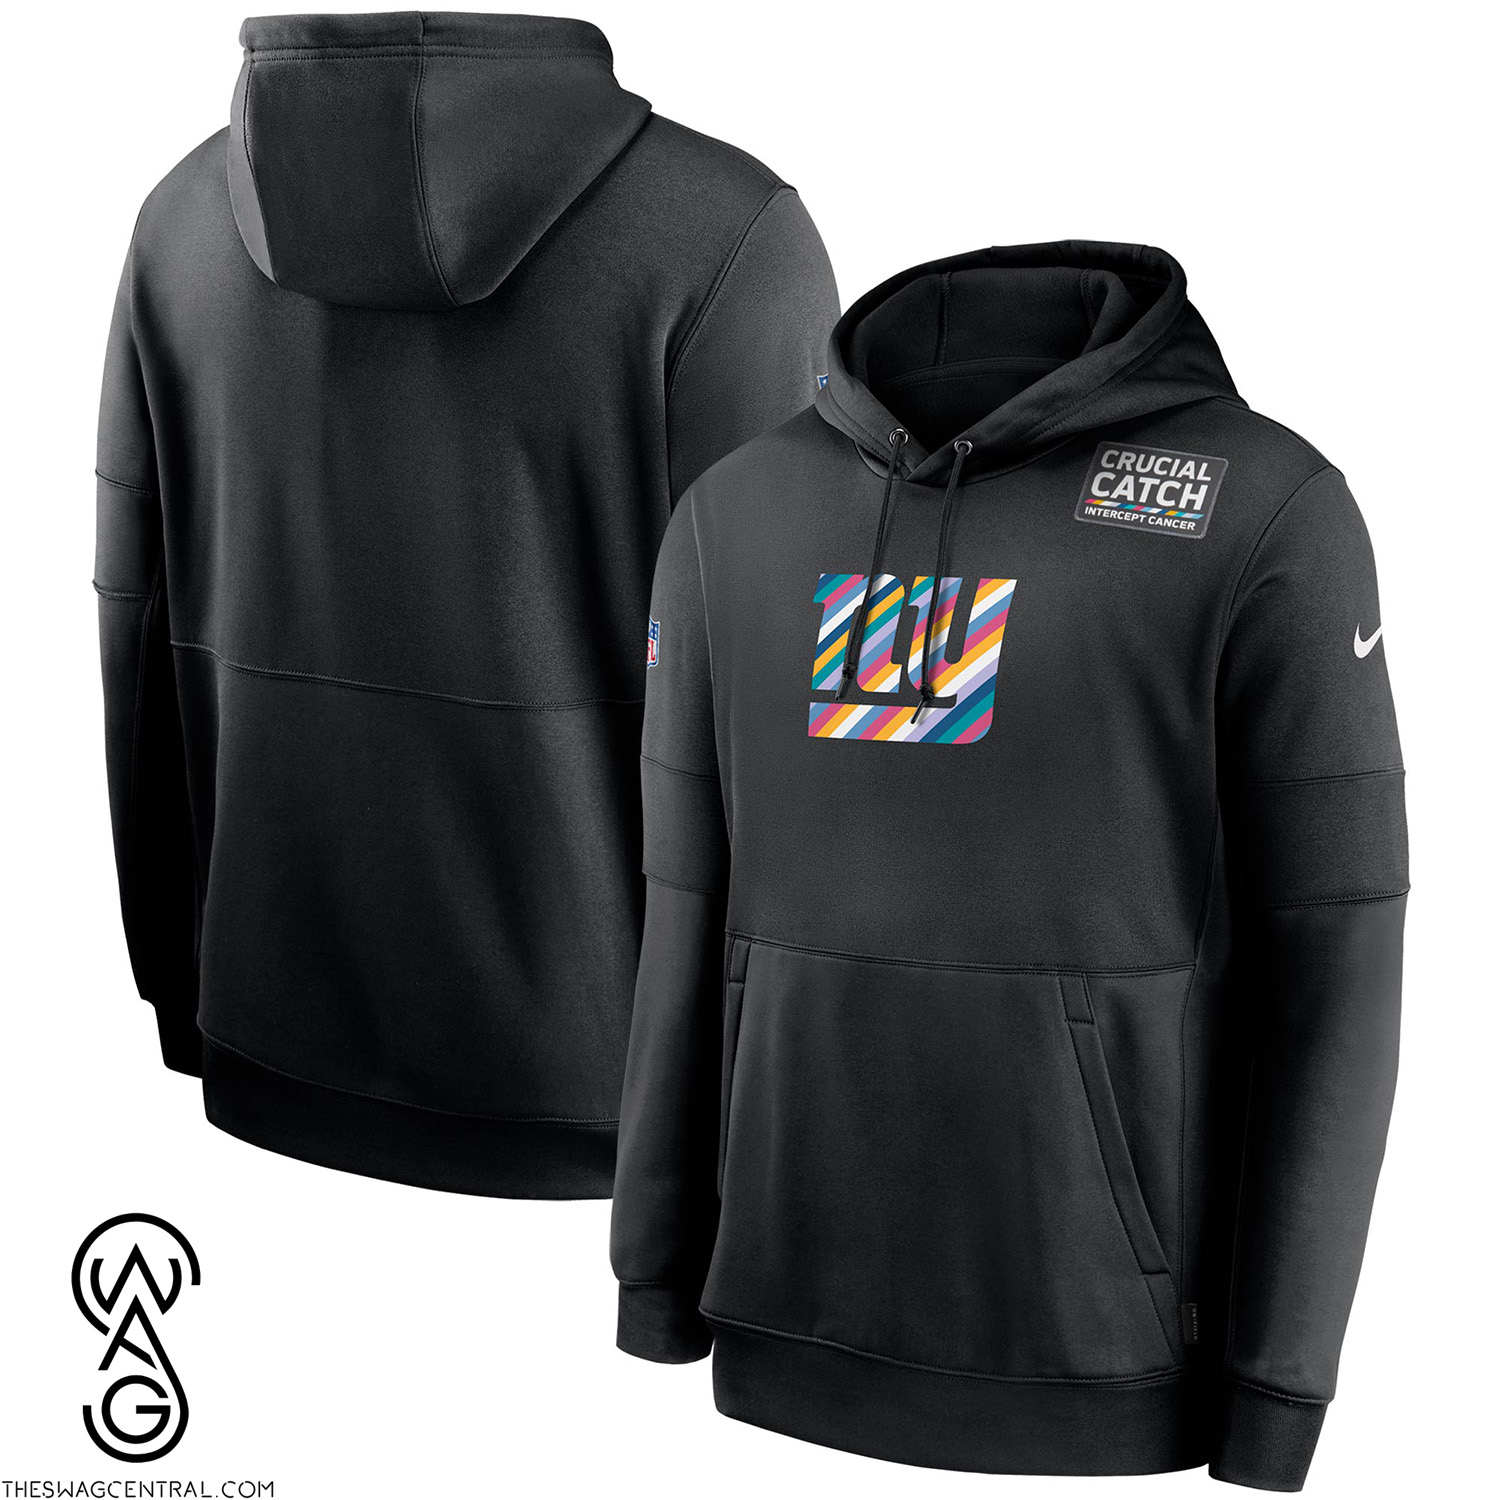 New York Giants Crucial Catch Sideline Performance Full Printing Hoodie